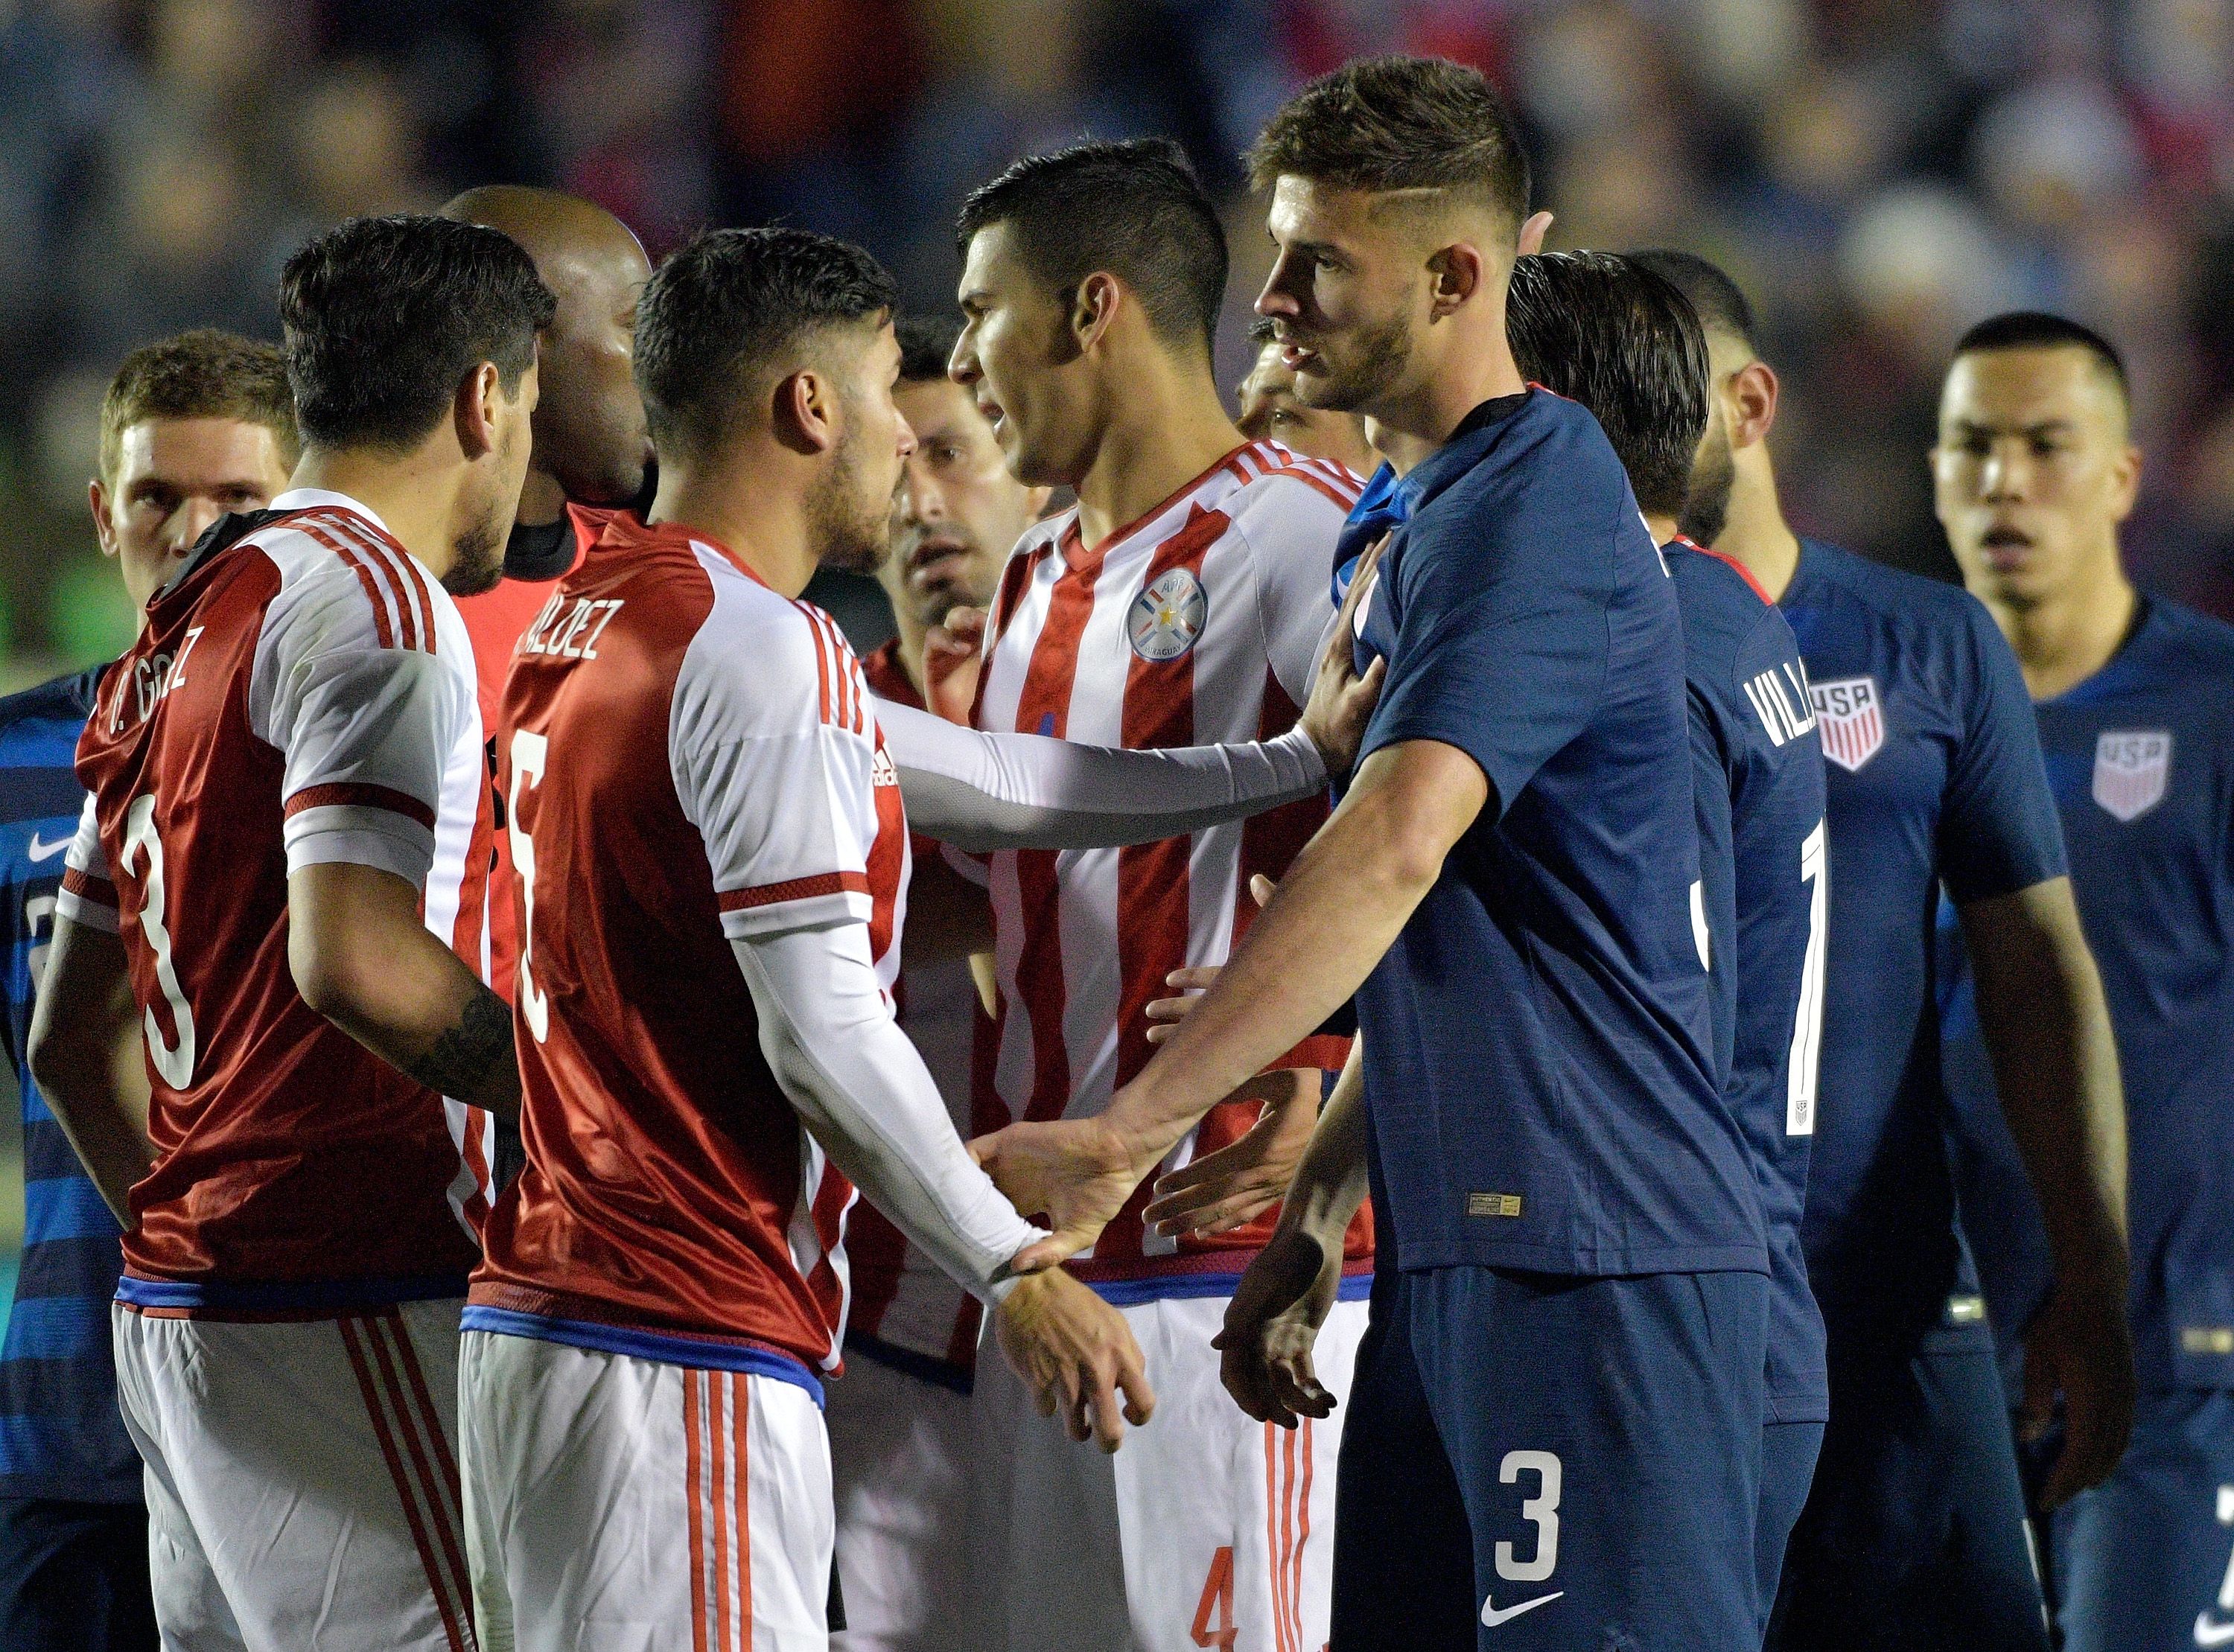 CARY, NC - MARCH 27:  Bruno Valdez #5 of Paraguay and Matt Miazga #3 of United States exchange angey words as the teams scuffle during their game at WakeMed Soccer Park on March 27, 2018 in Cary, North Carolina. The United States won 1-0.  (Photo by Grant Halverson/Getty Images)